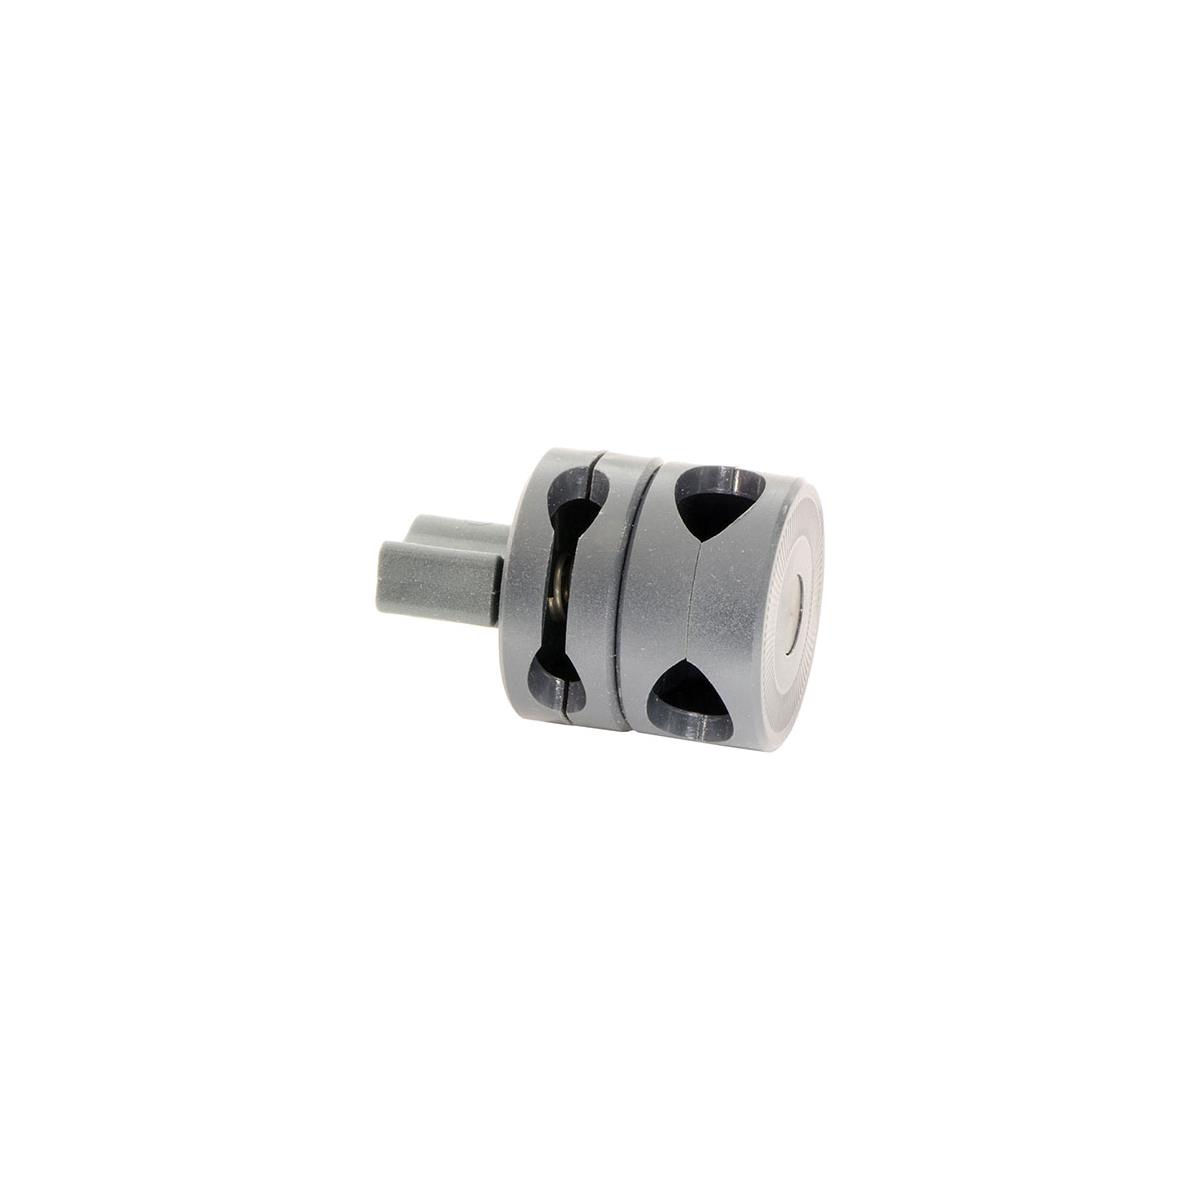 Image of Schoeps RG8 Swivel Joint